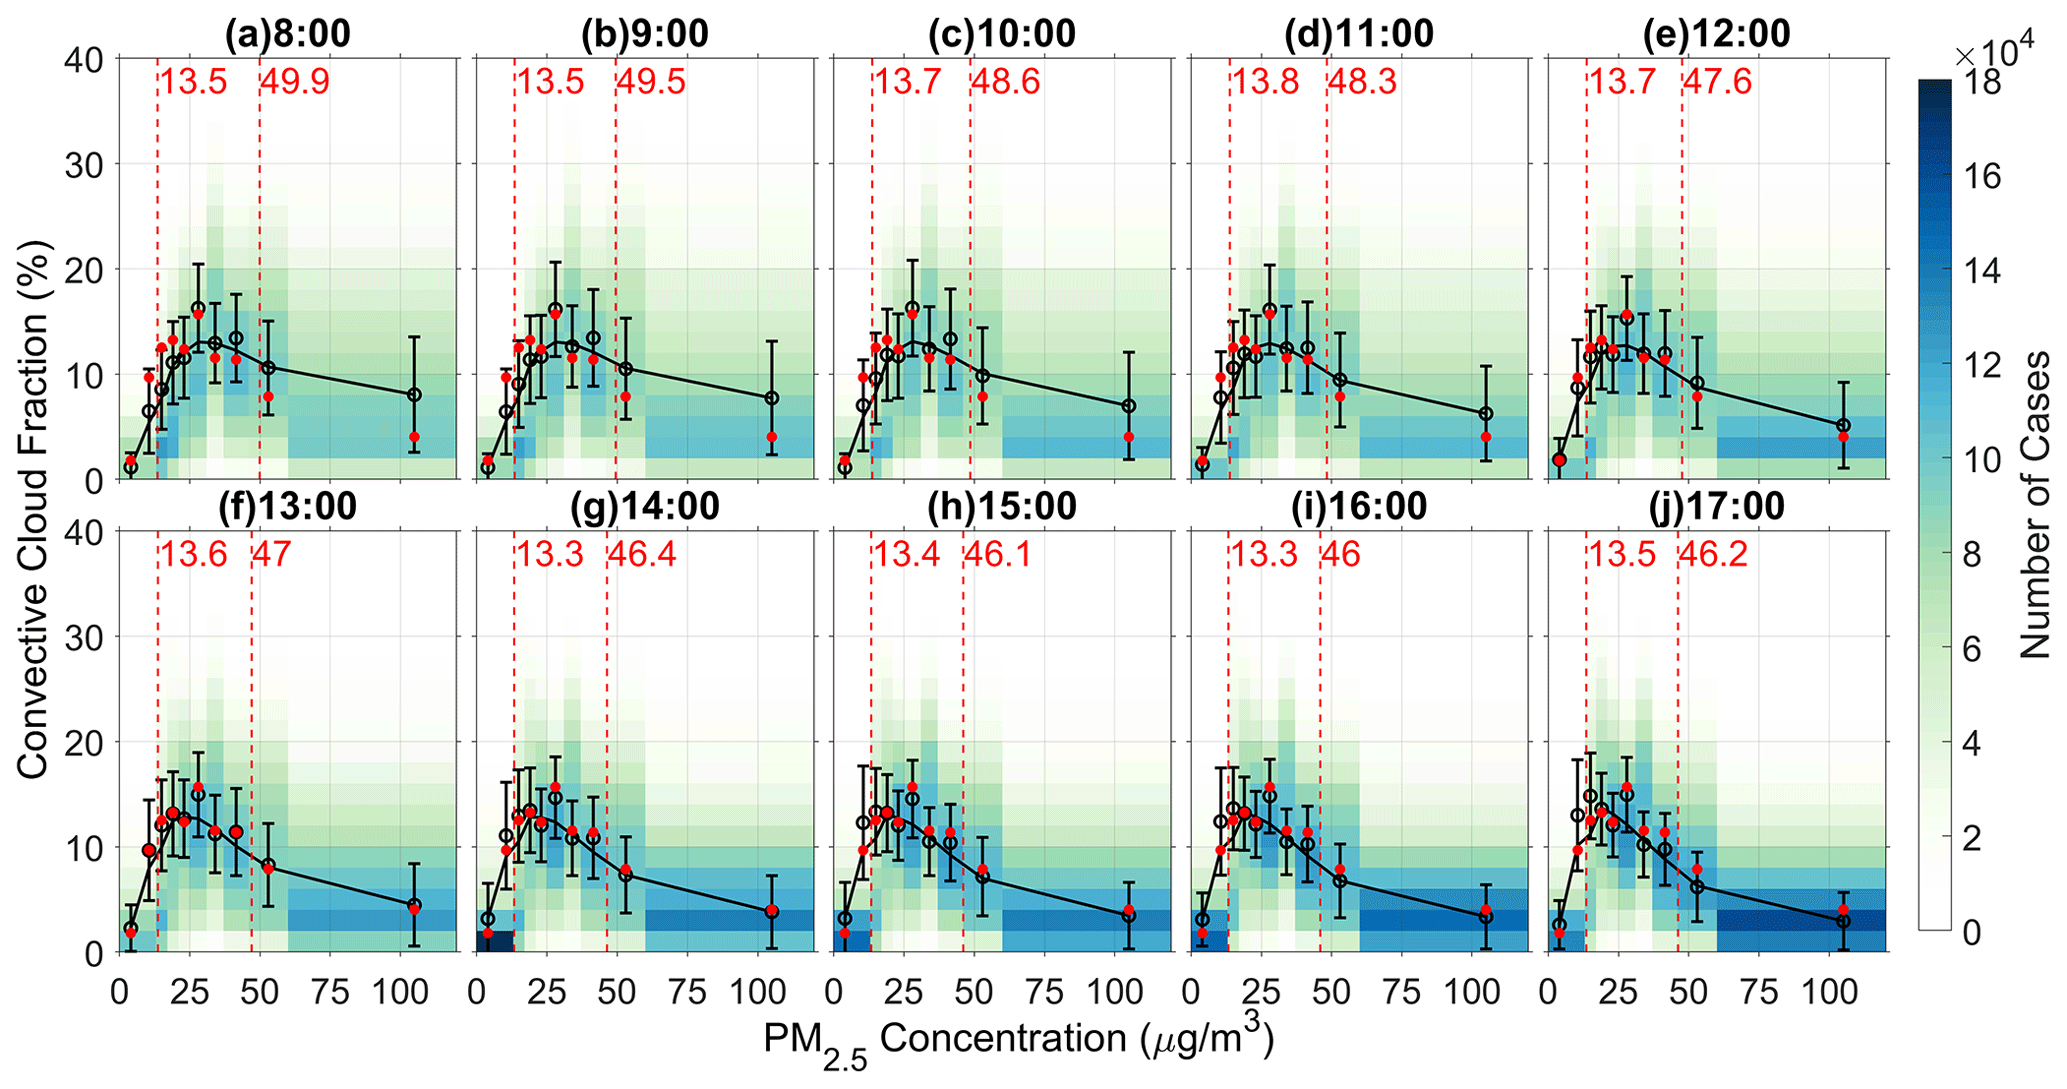 Acp Potential Impact Of Aerosols On Convective Clouds Revealed By Himawari 8 Observations Over Different Terrain Types In Eastern China